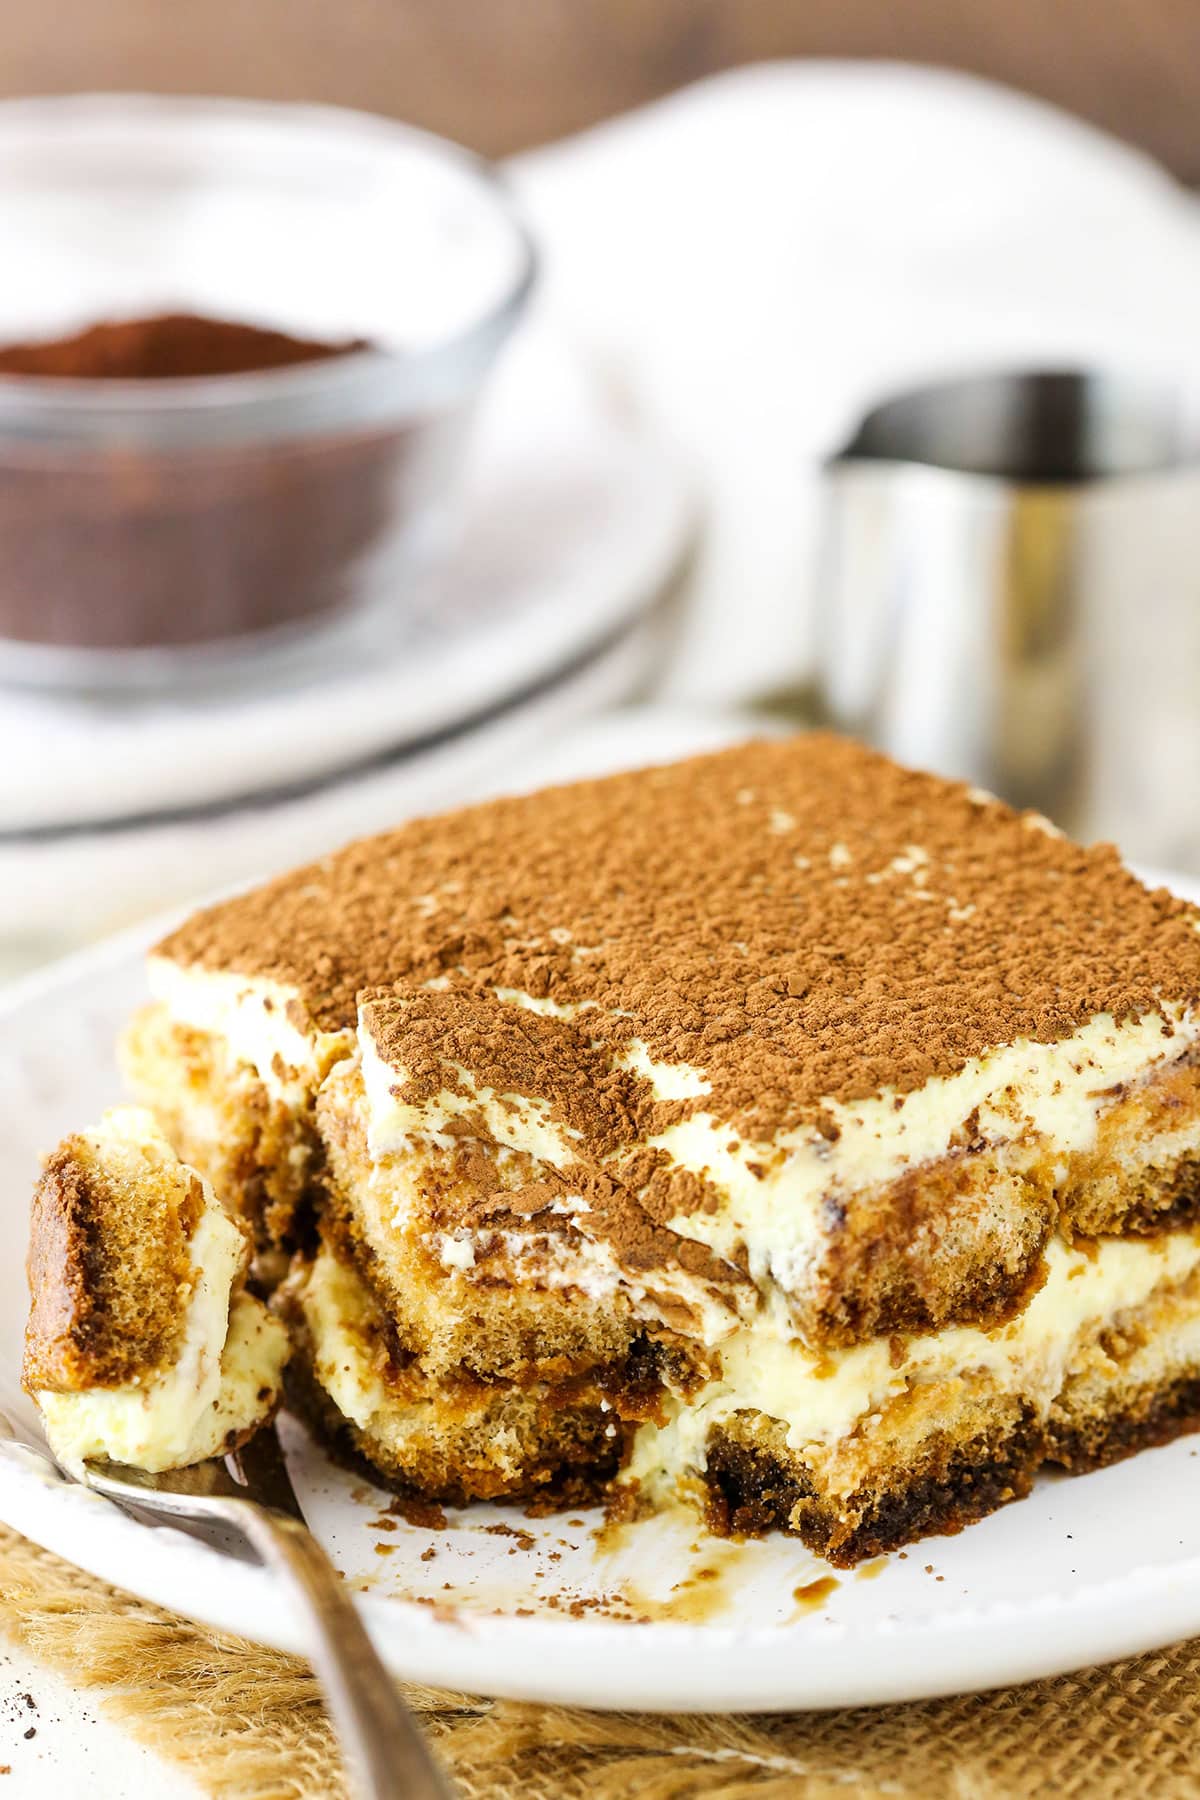 A square serving of Easy Tiramisu with a bite taken out next to a fork on a small white plate